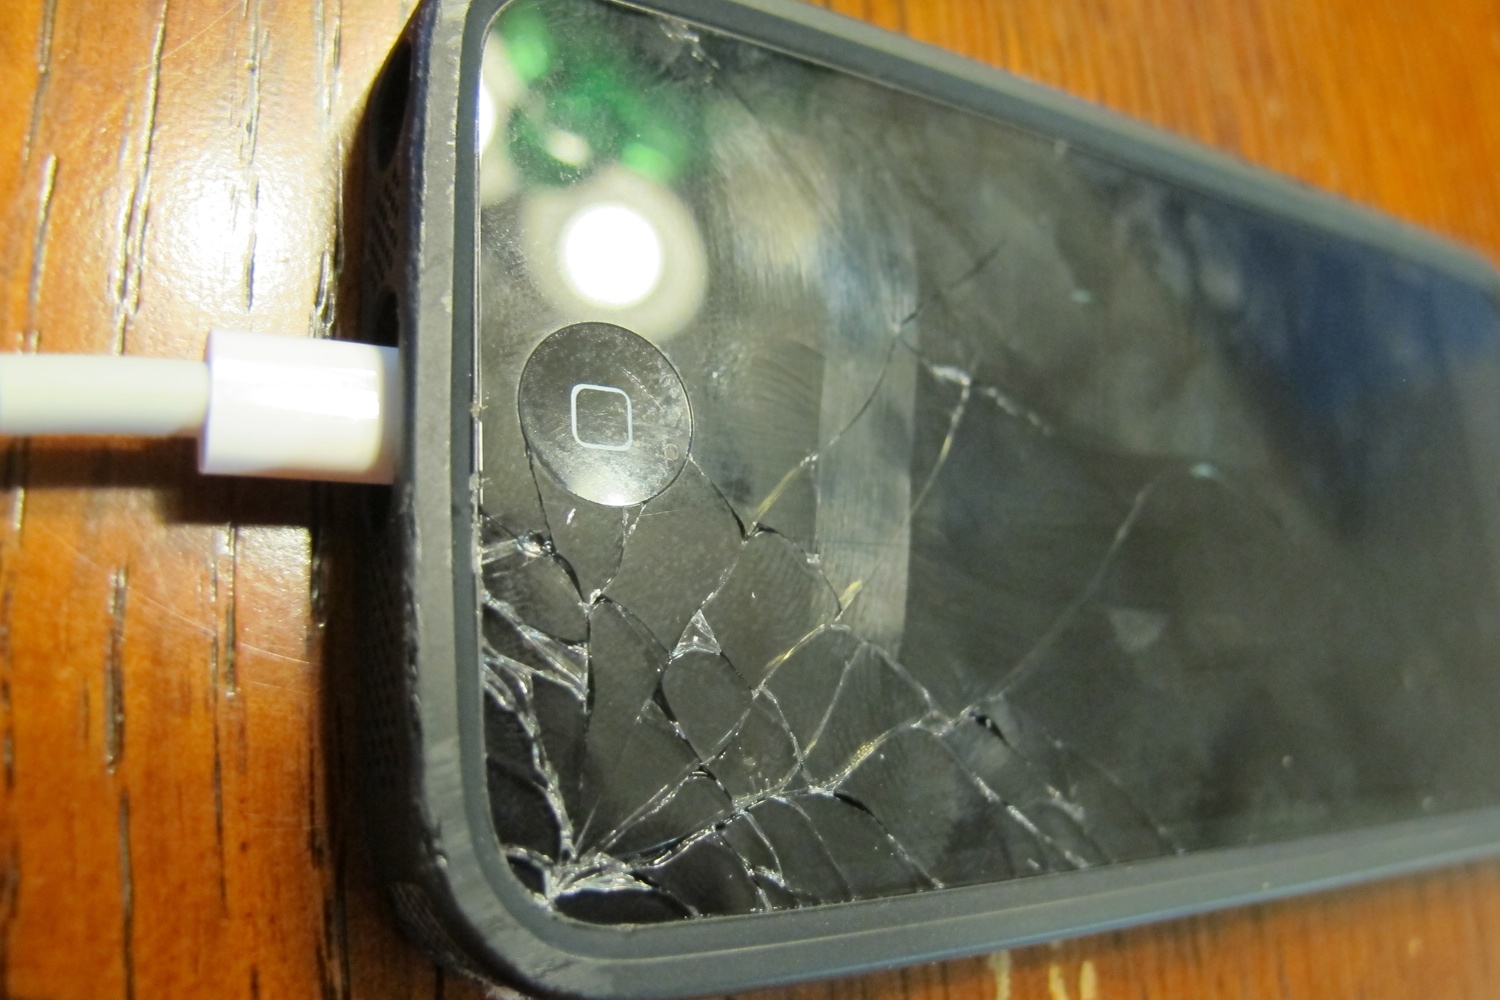 Apple may be on its way towards a scratch-proof screen for their iPhone.